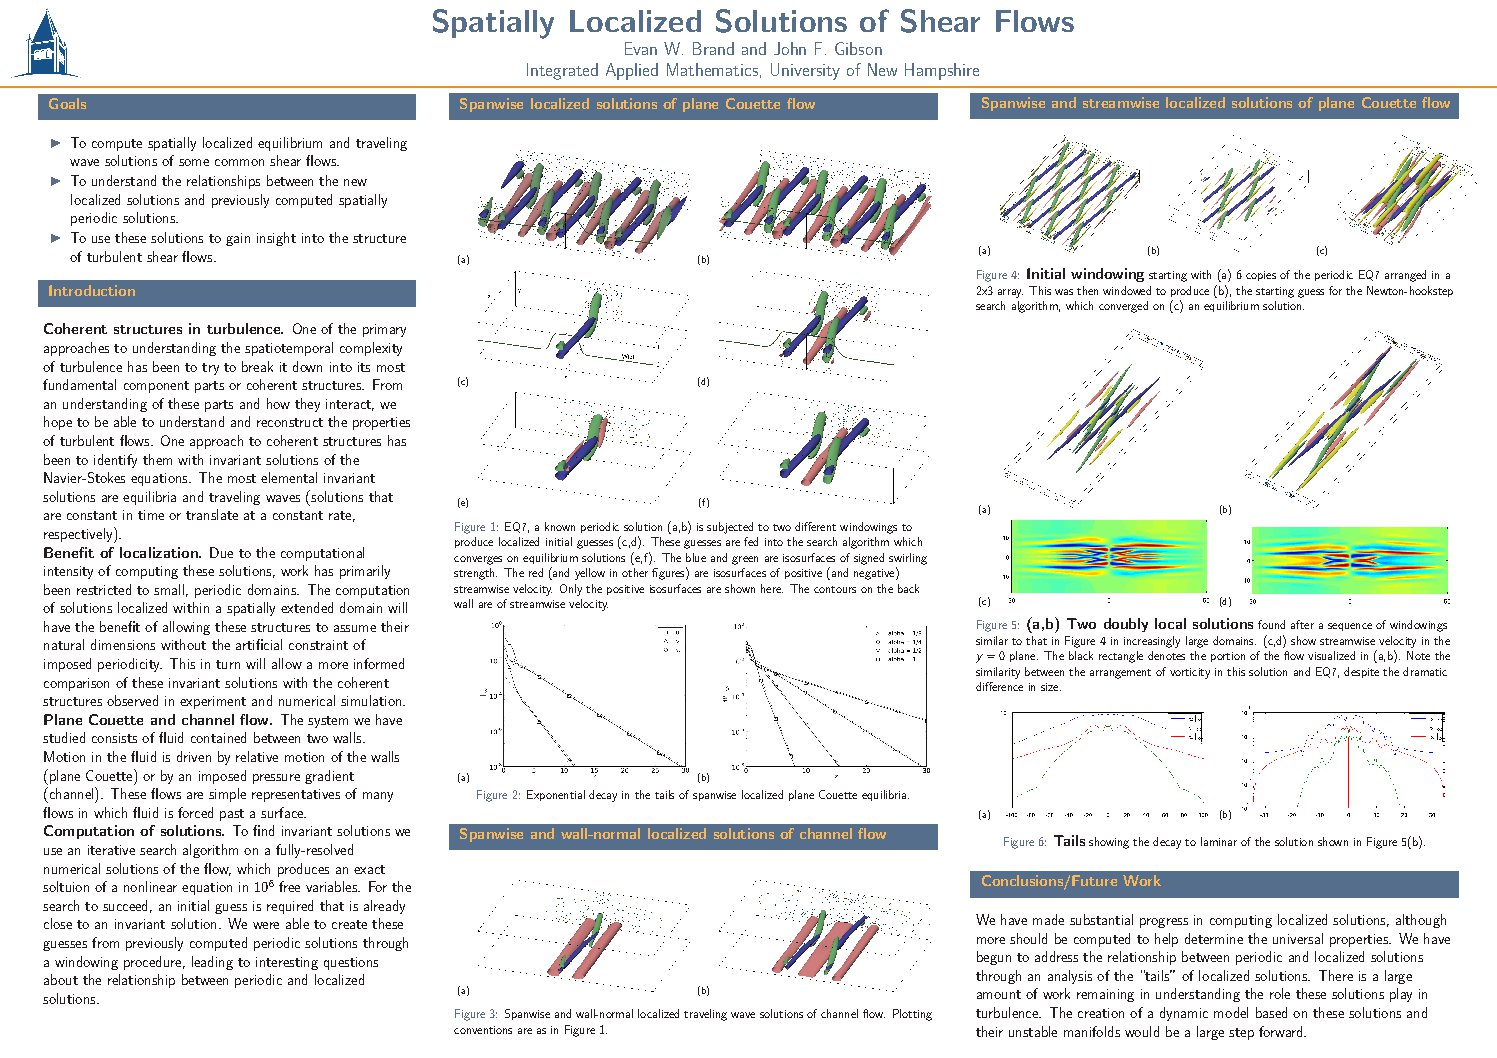 Spatially Localized Solutions Of Shear Flows by ewg5